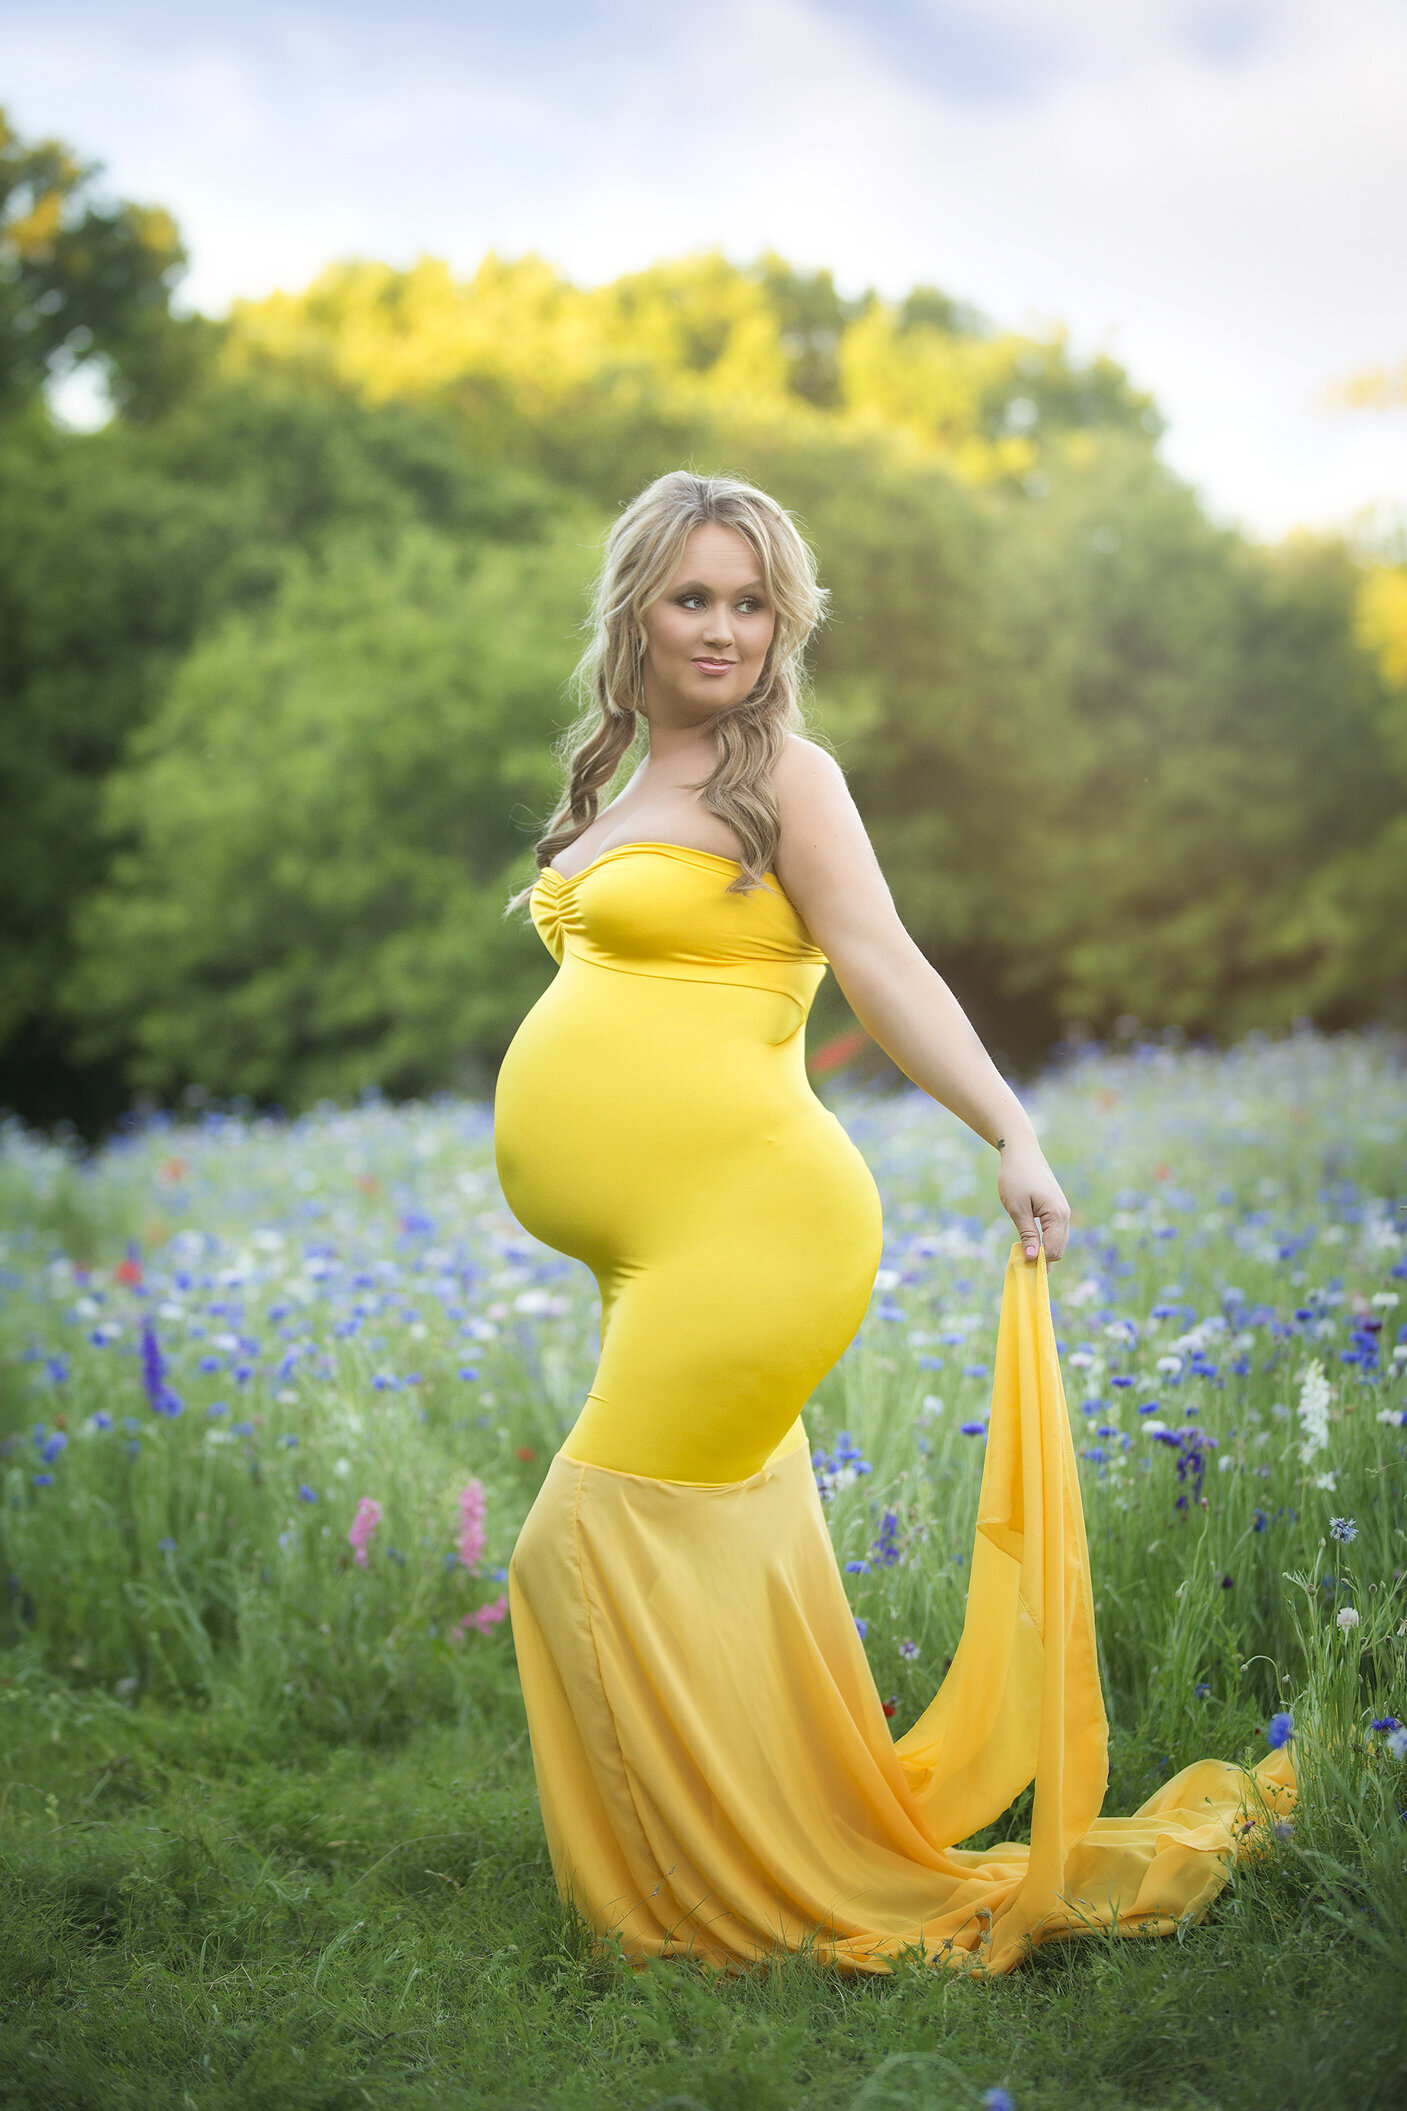 Pregnant woman with yellow maternity gown in wildflowers.